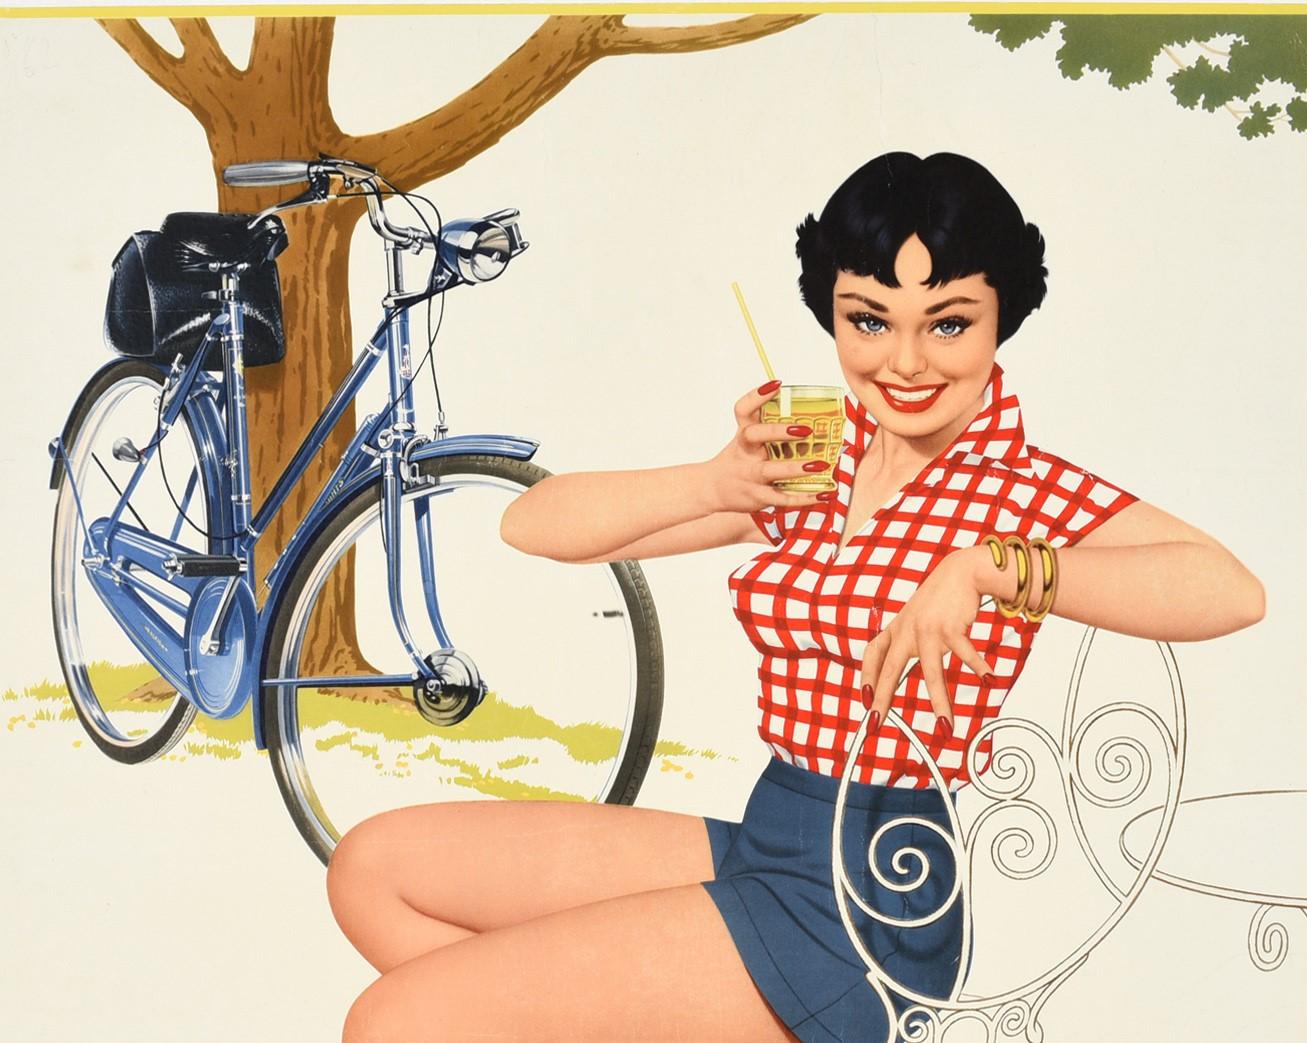 Original vintage midcentury advertising poster for Raleigh the all-steel bicycle featuring a great illustration by the pin up artist Dickens (1907-2004) depicting a smiling young lady wearing a blue mini skirt and a red chequered shirt, sitting on a